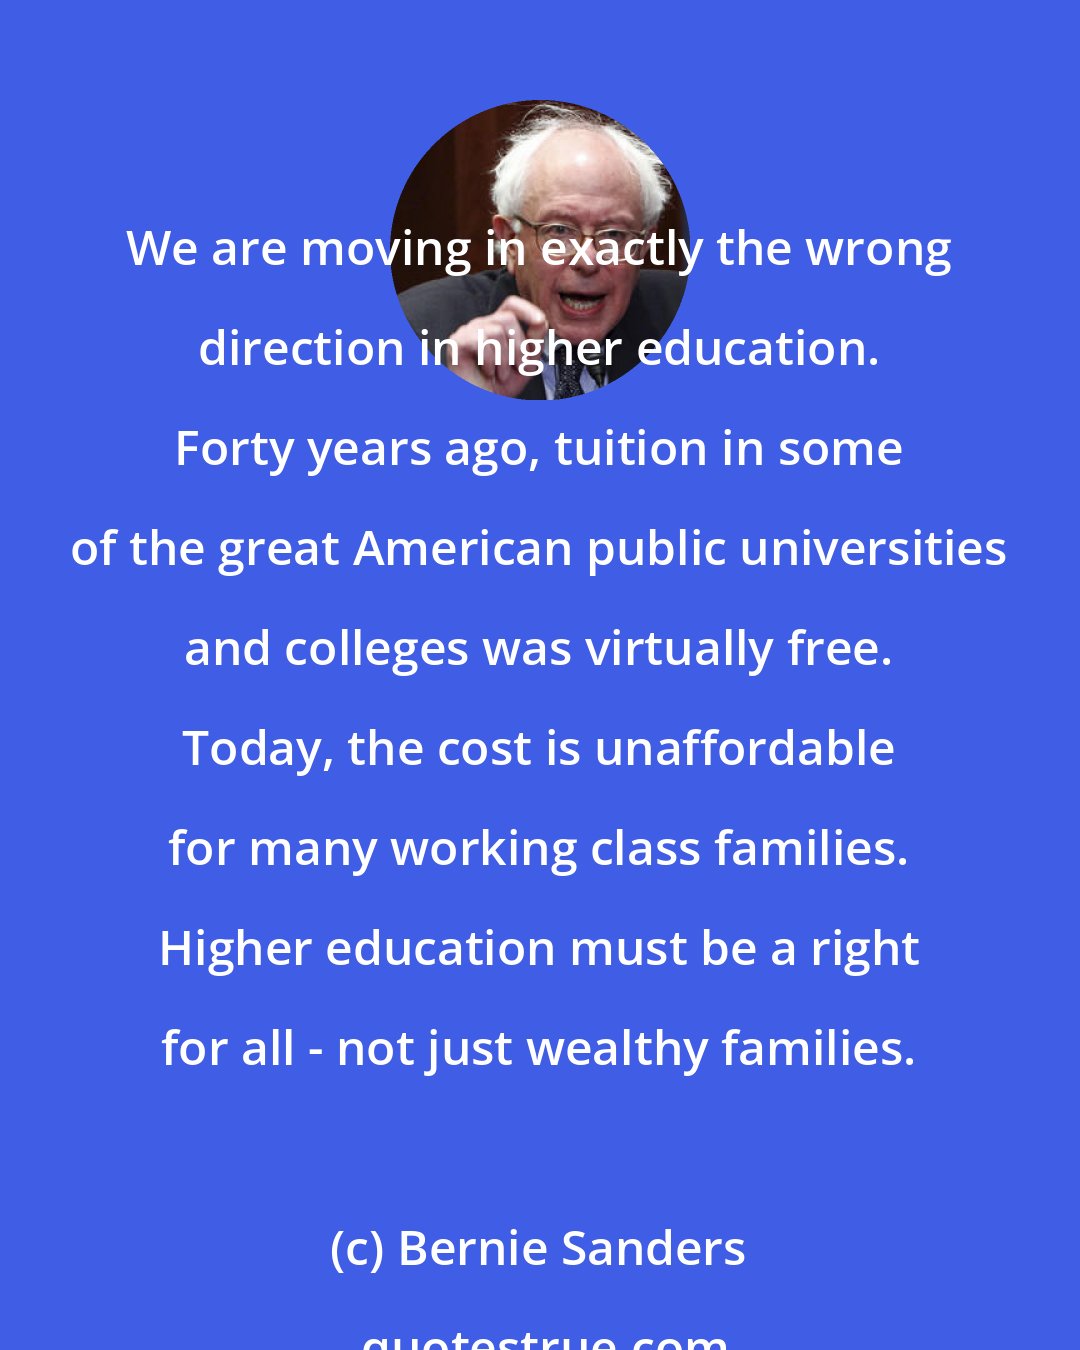 Bernie Sanders: We are moving in exactly the wrong direction in higher education. Forty years ago, tuition in some of the great American public universities and colleges was virtually free. Today, the cost is unaffordable for many working class families. Higher education must be a right for all - not just wealthy families.